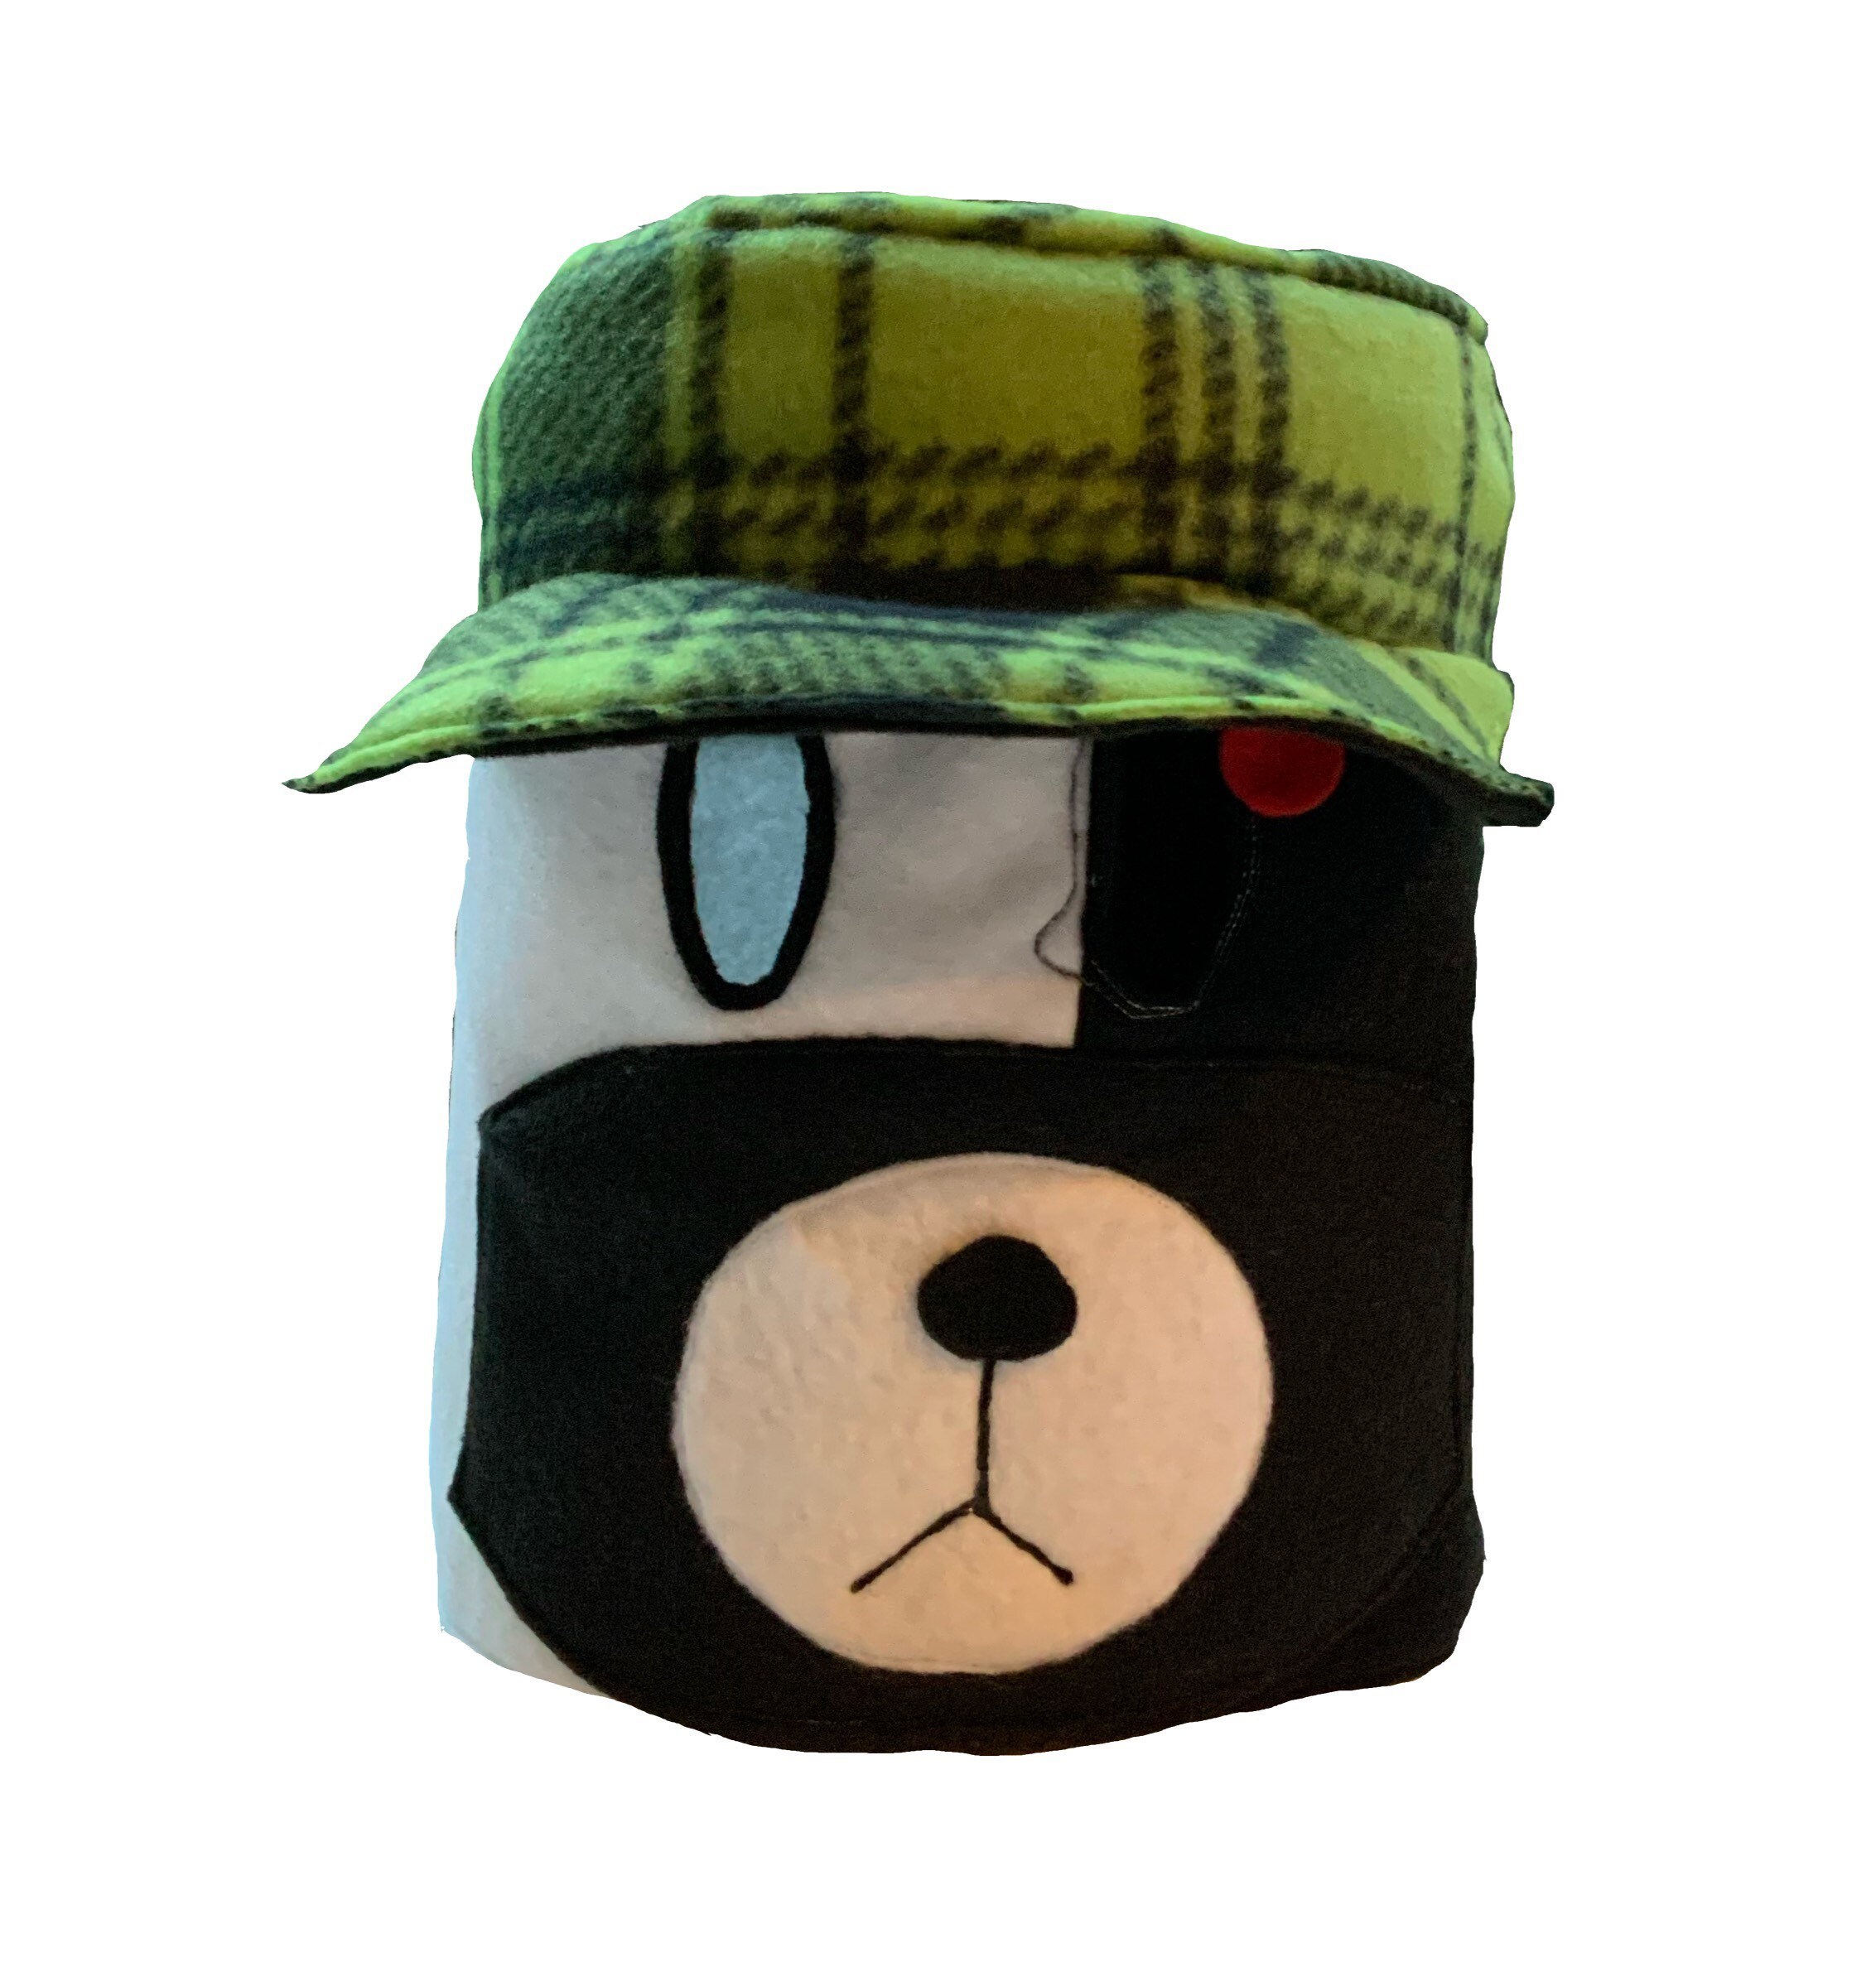 Roblox head mask costume for kids ages 4 CUSTOM mouth/ skin/ -  Portugal